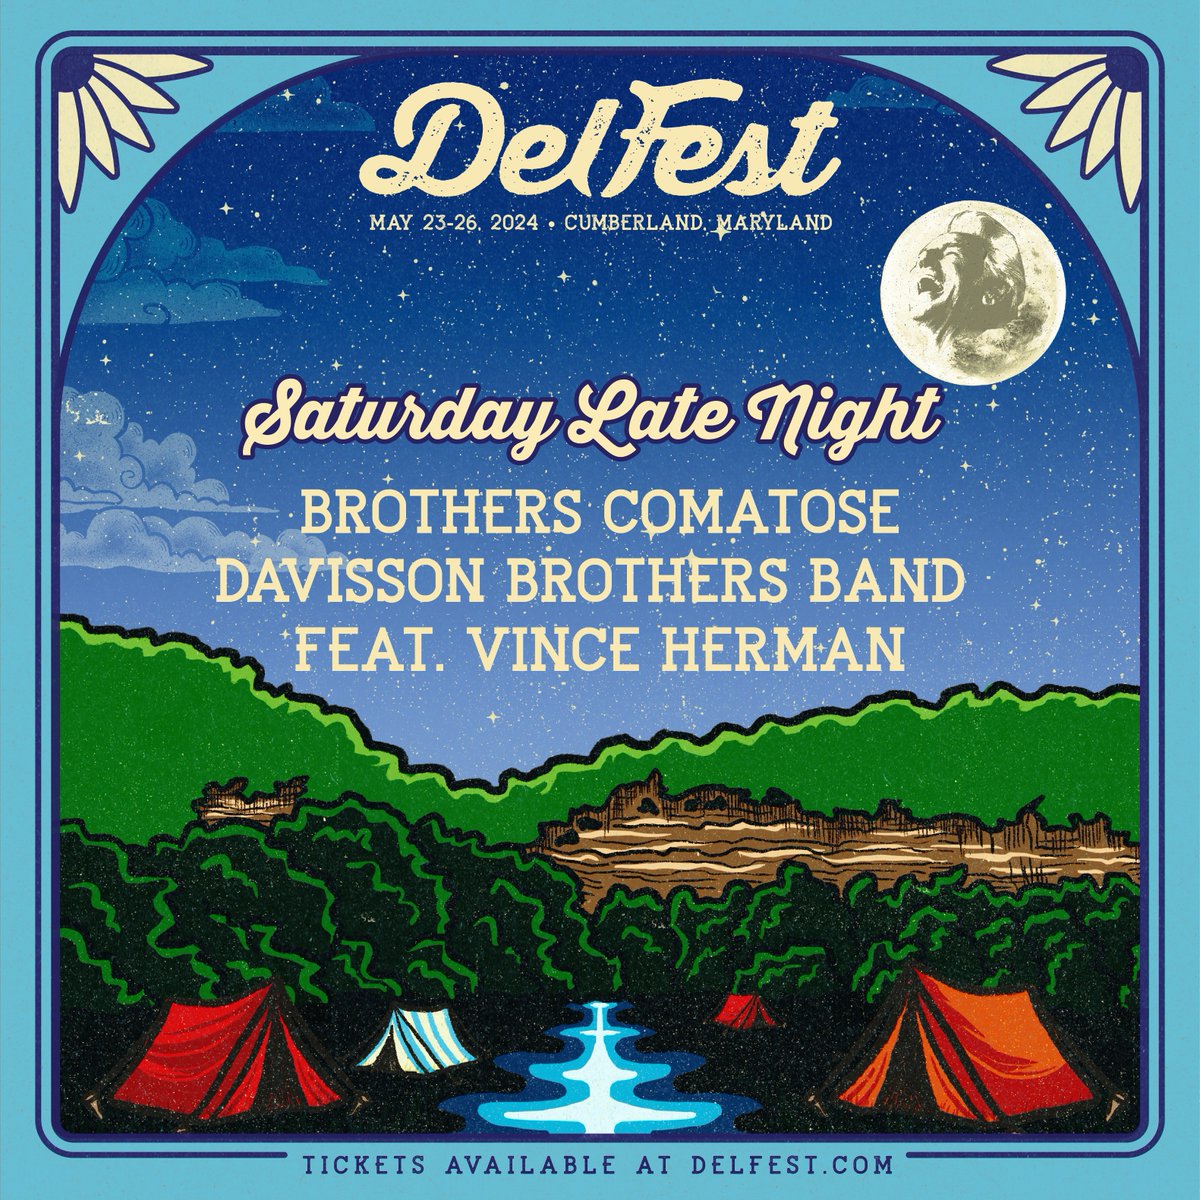 We're loving this late night lineup. Who's ready for @Delfest 2024?